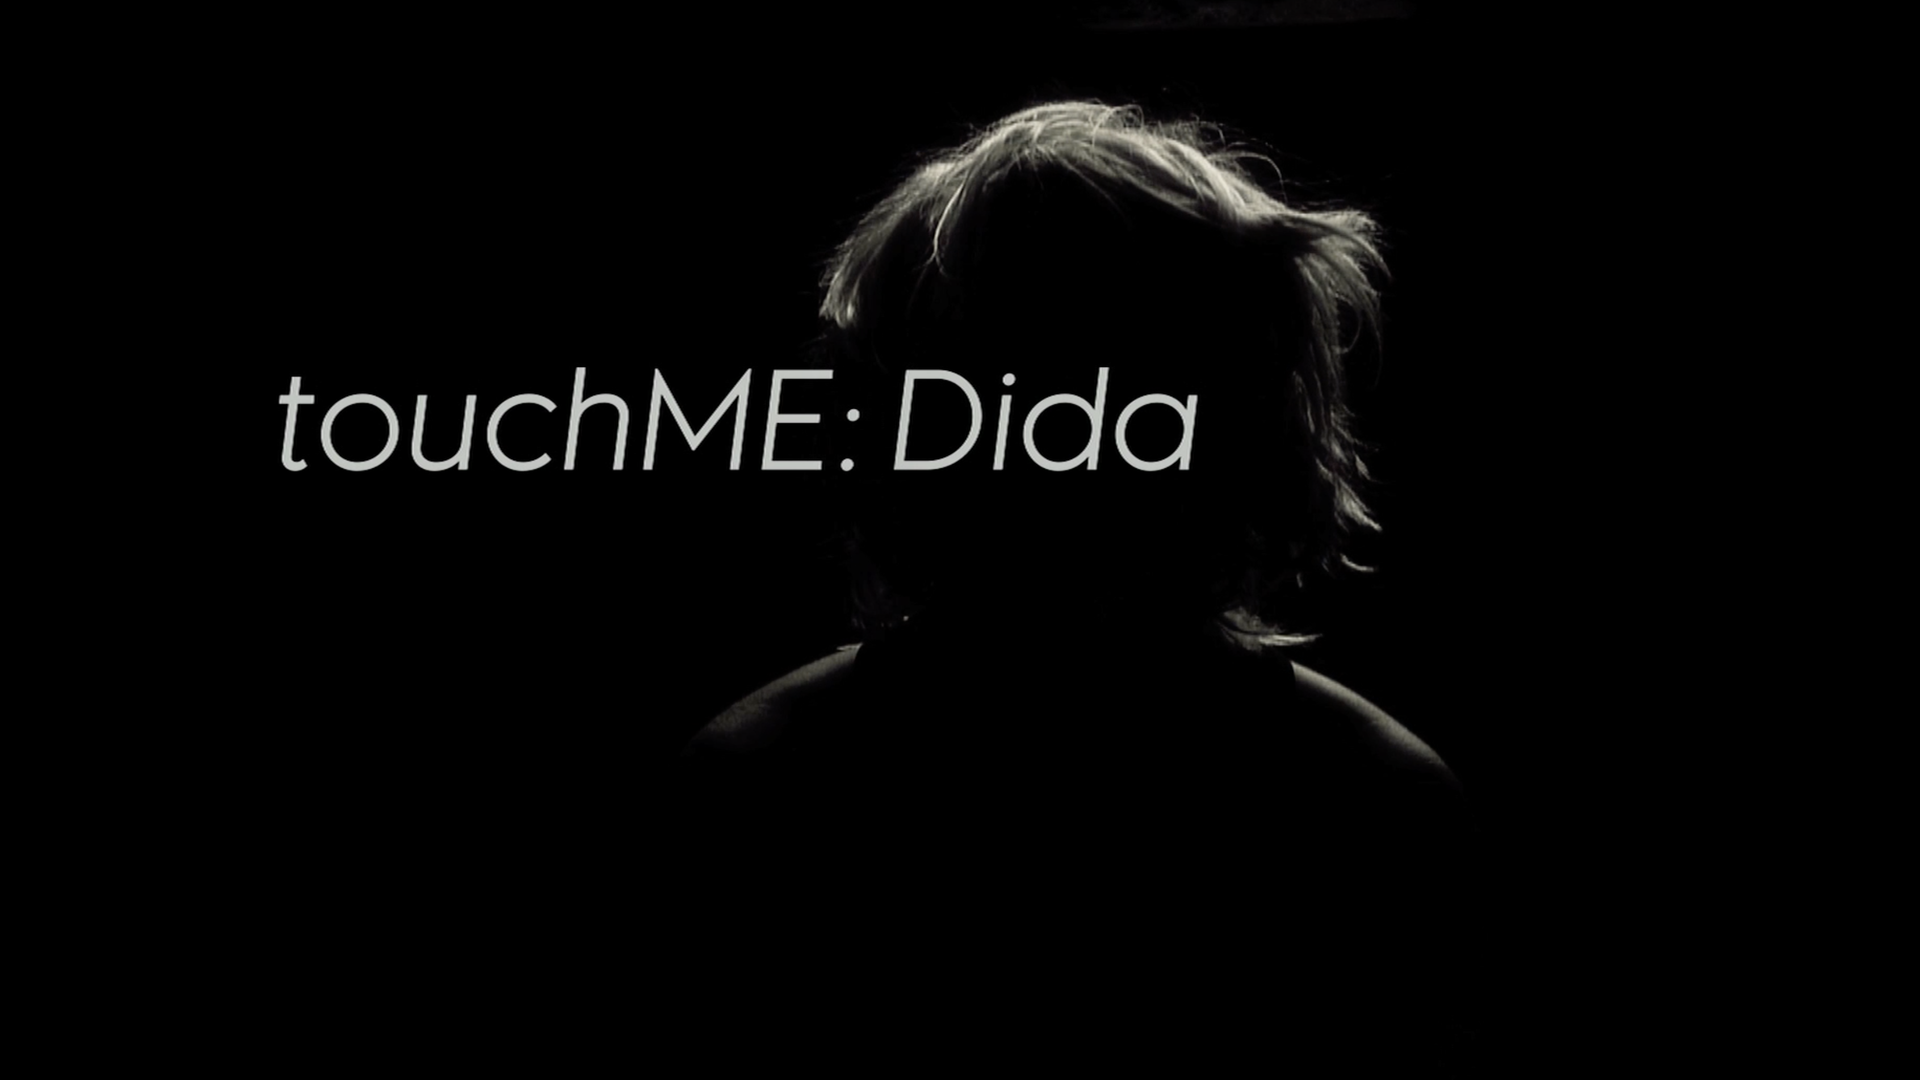 touchME: Dida - a film by Felipe Barral in association with gloATL